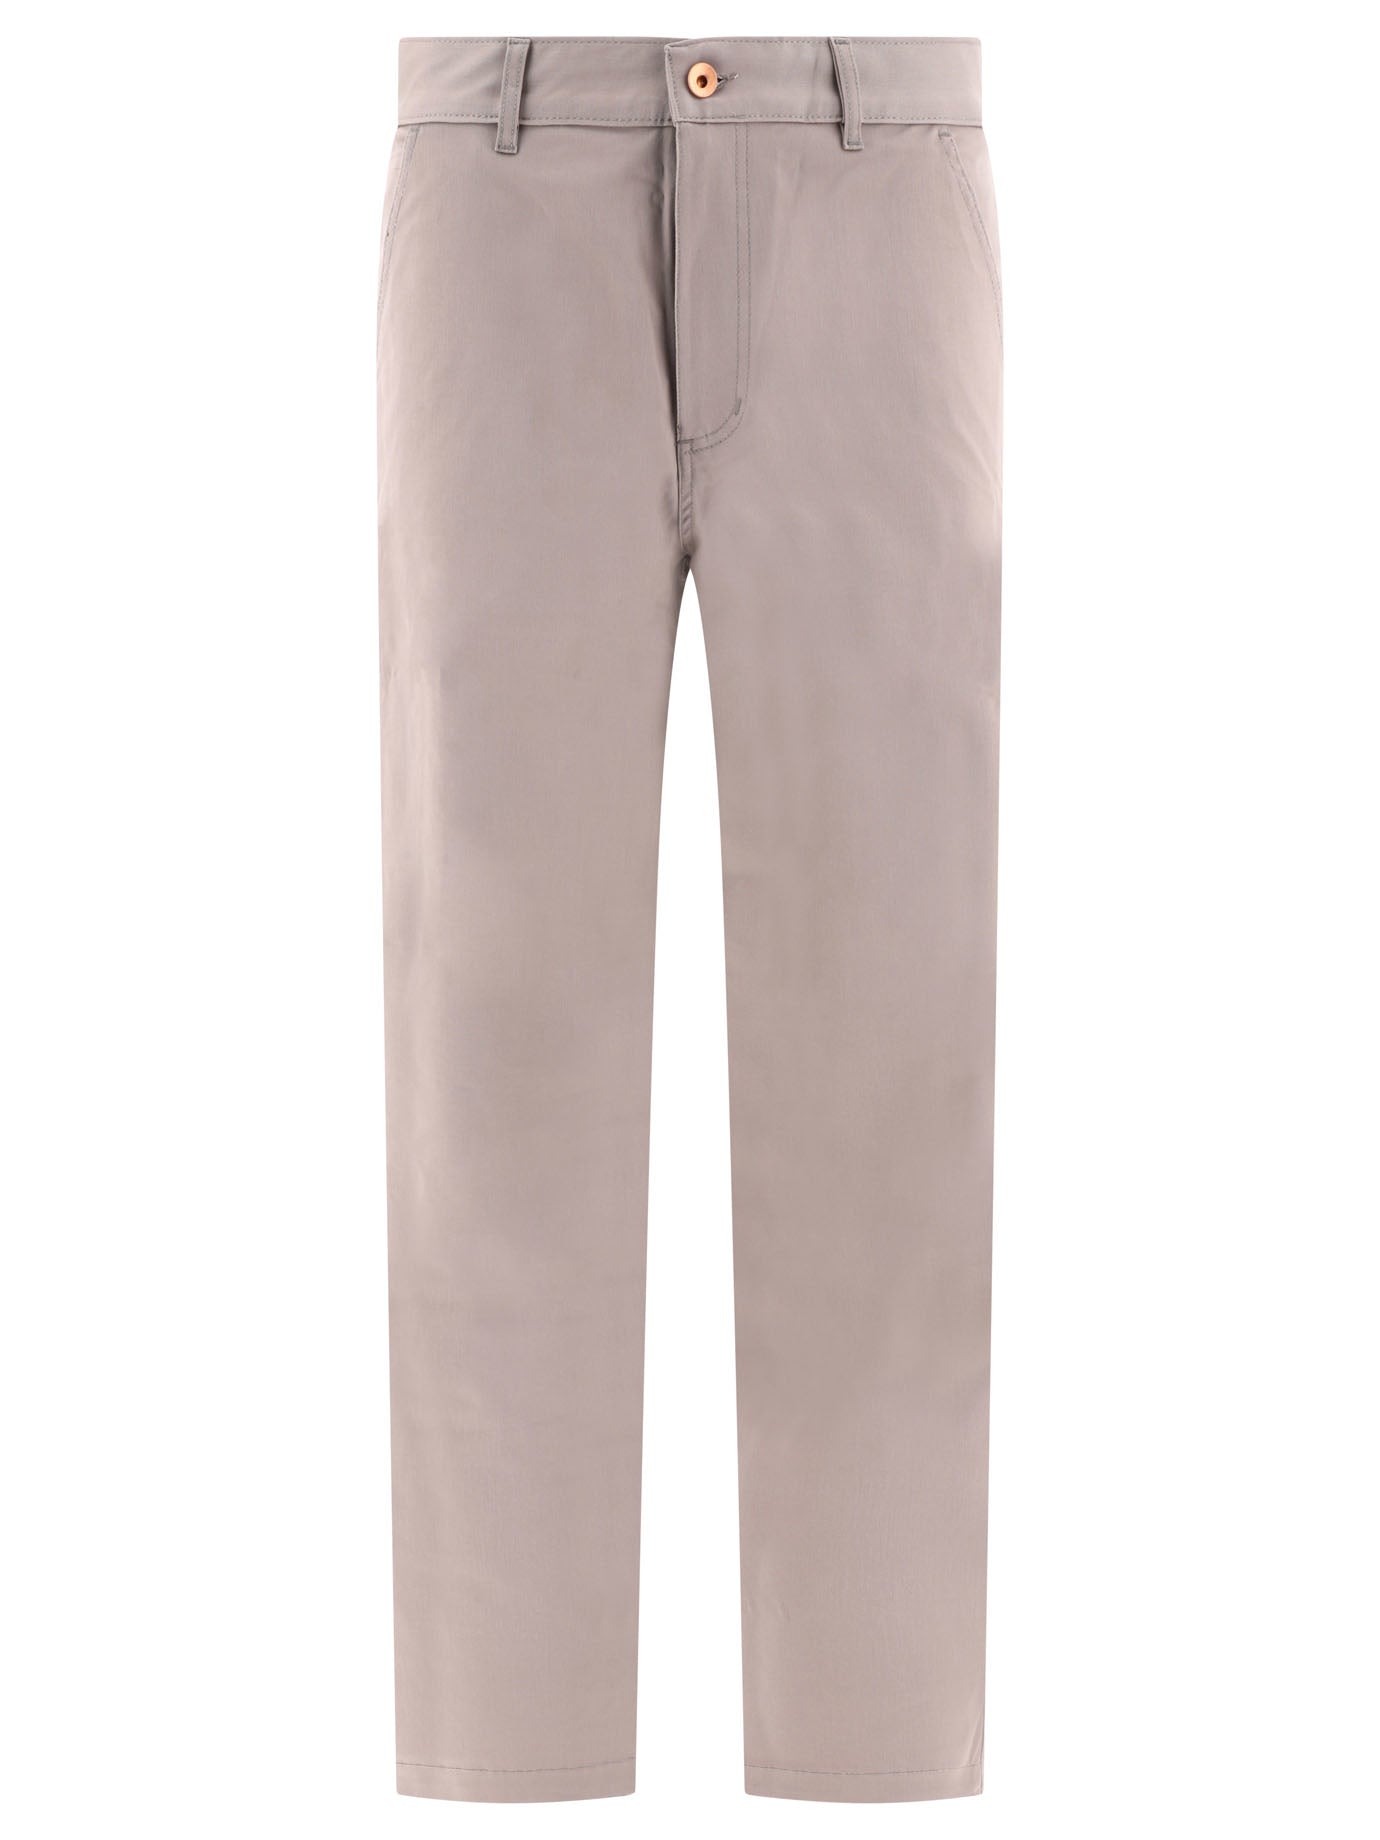 Shop Andblue Carpenter Trousers Brown